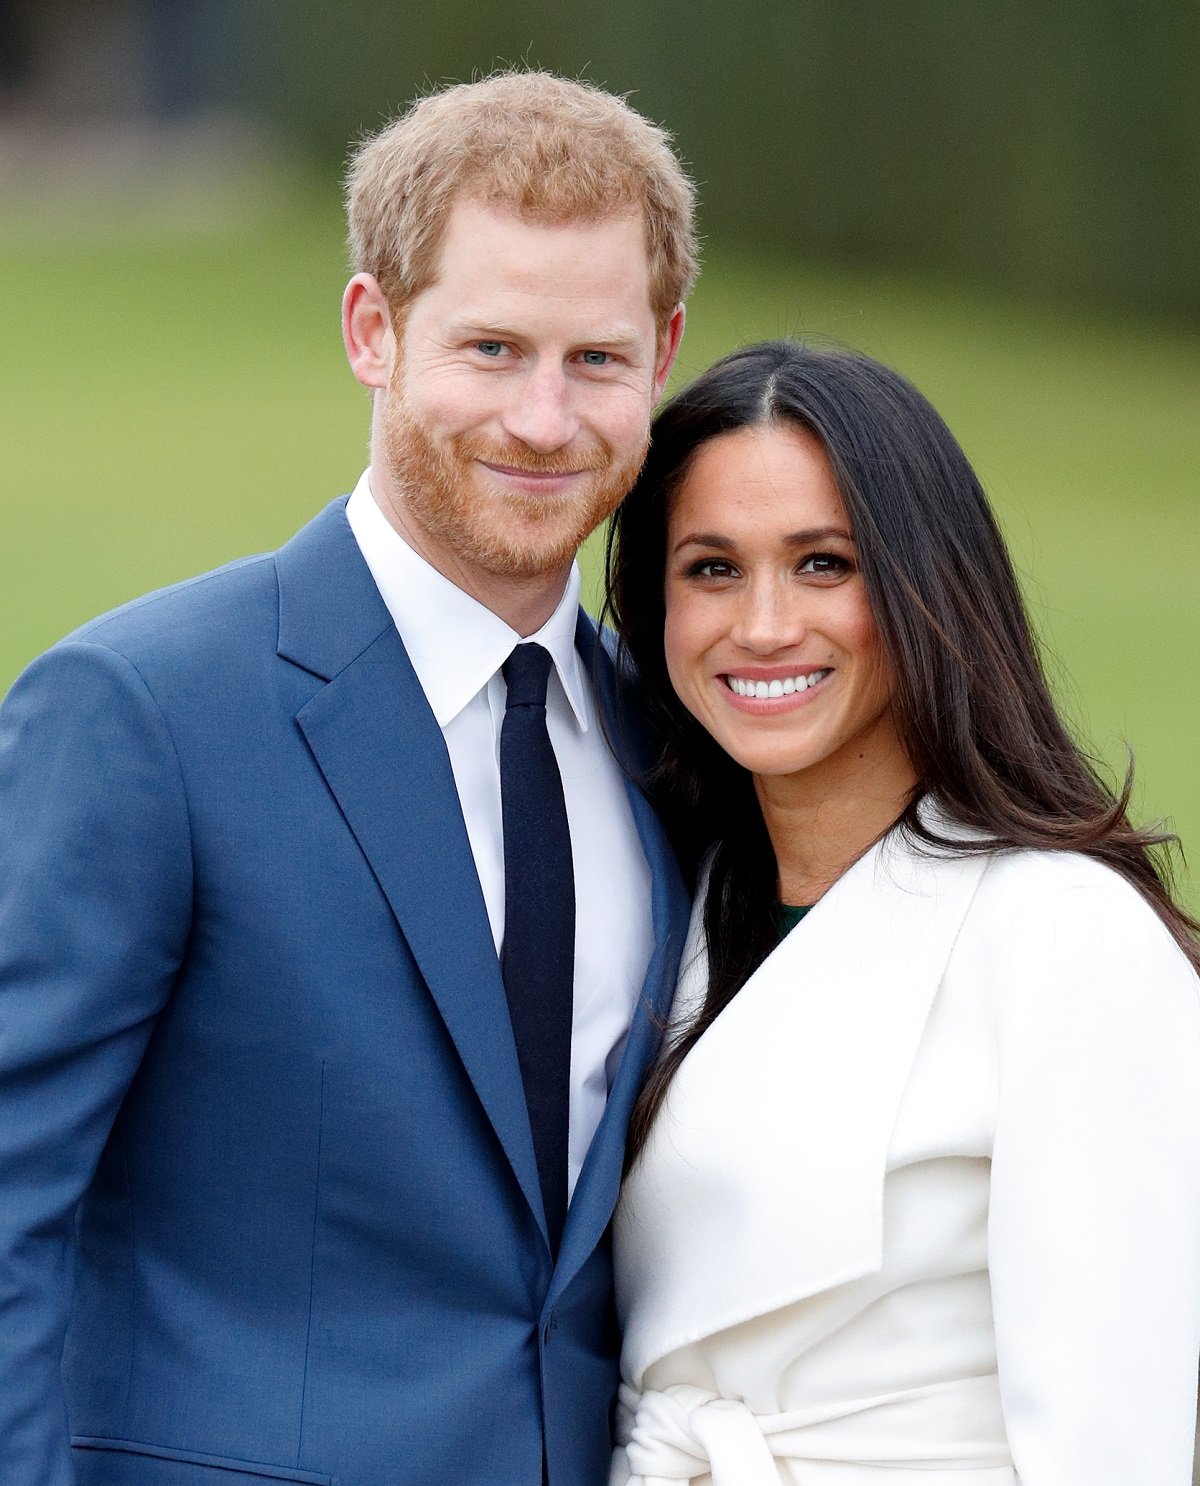 Prince Harry and Meghan Markle smiling at an official photocall to announce their engagement at The Sunken Gardens, Kensington Palace on November 27, 2017 in London, England